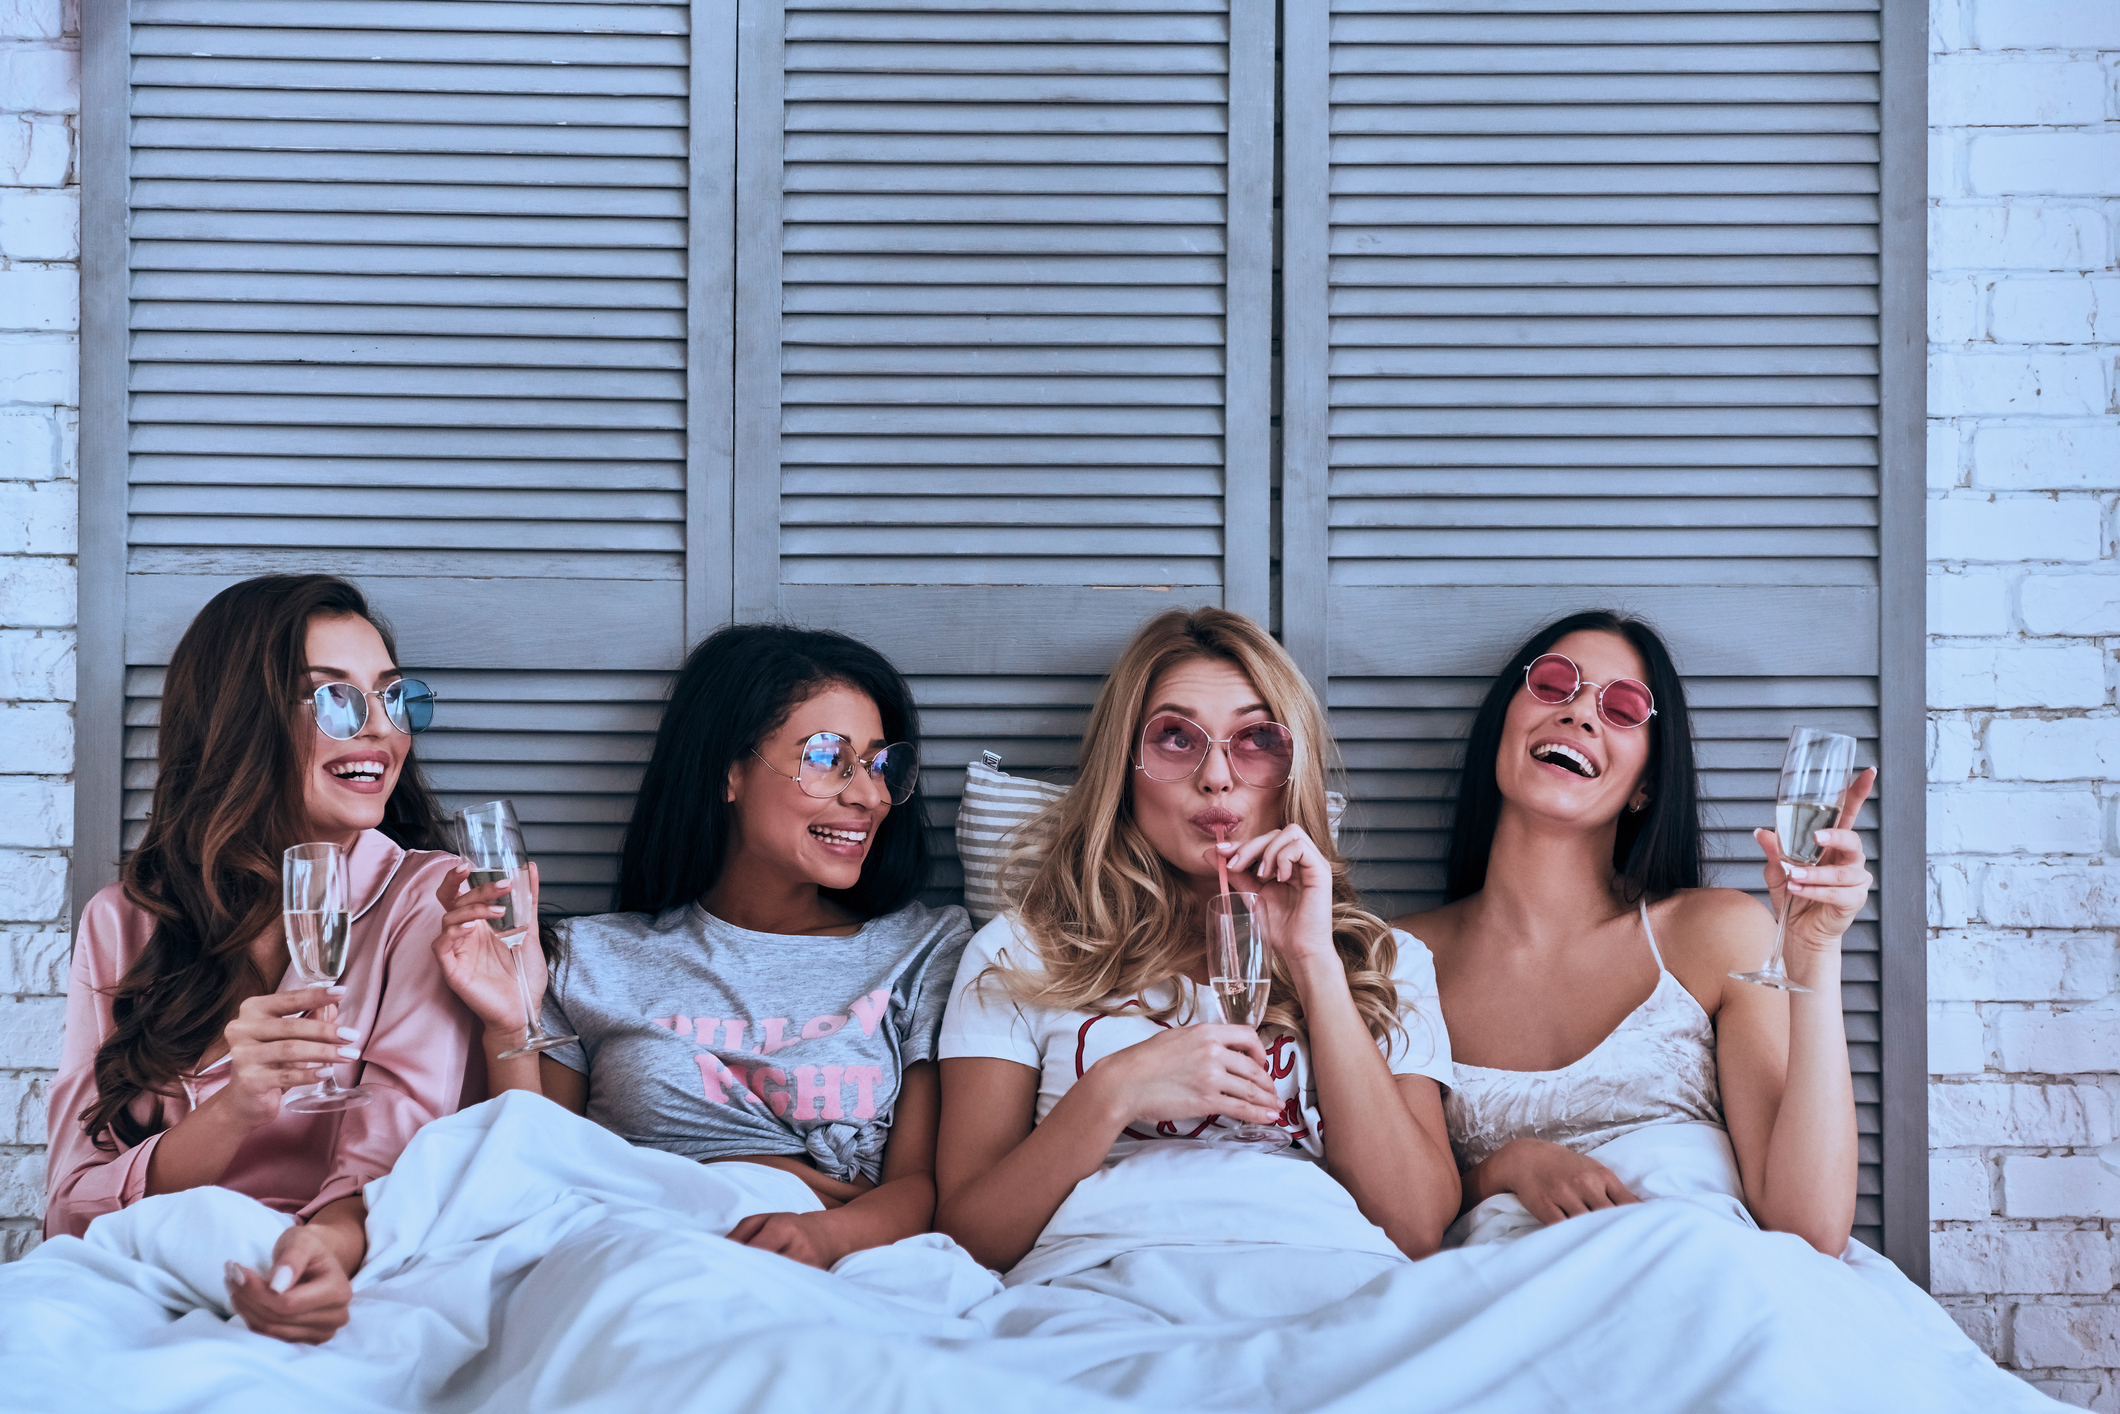 Four attractive young women in pajamas drinking cocktails and smiling while lying in the bed